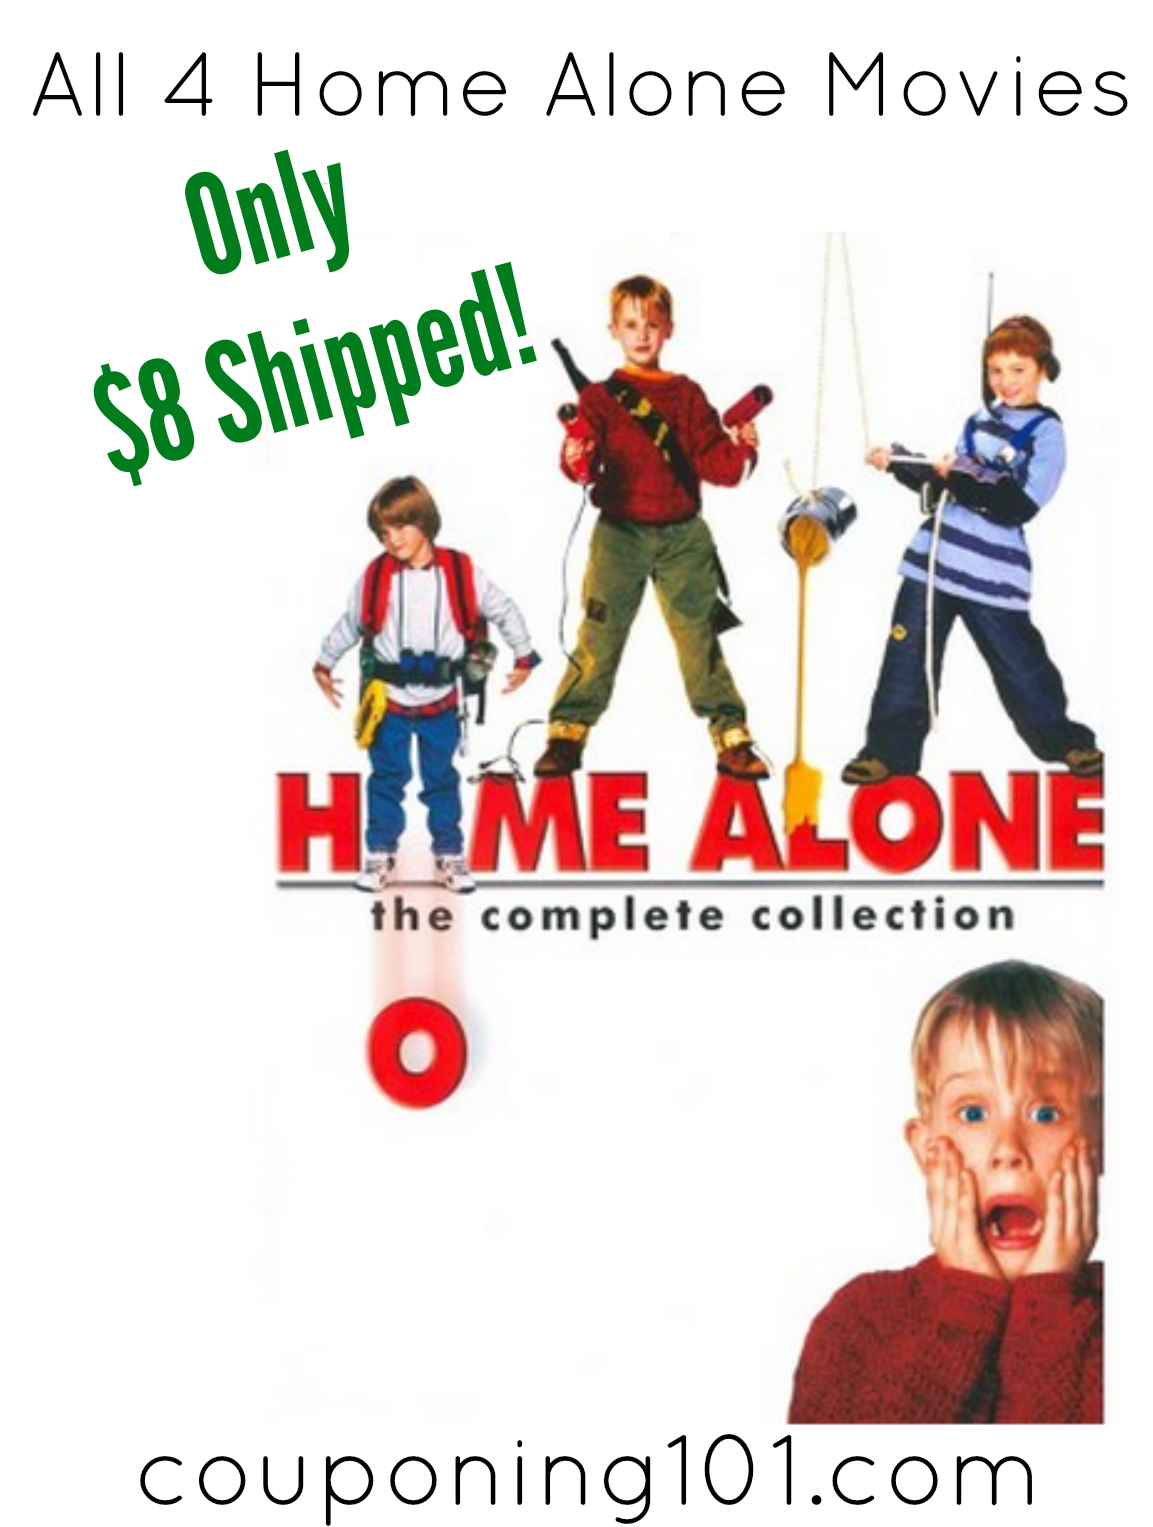 Get all 4 Home Alone movies for just $8 shipped!